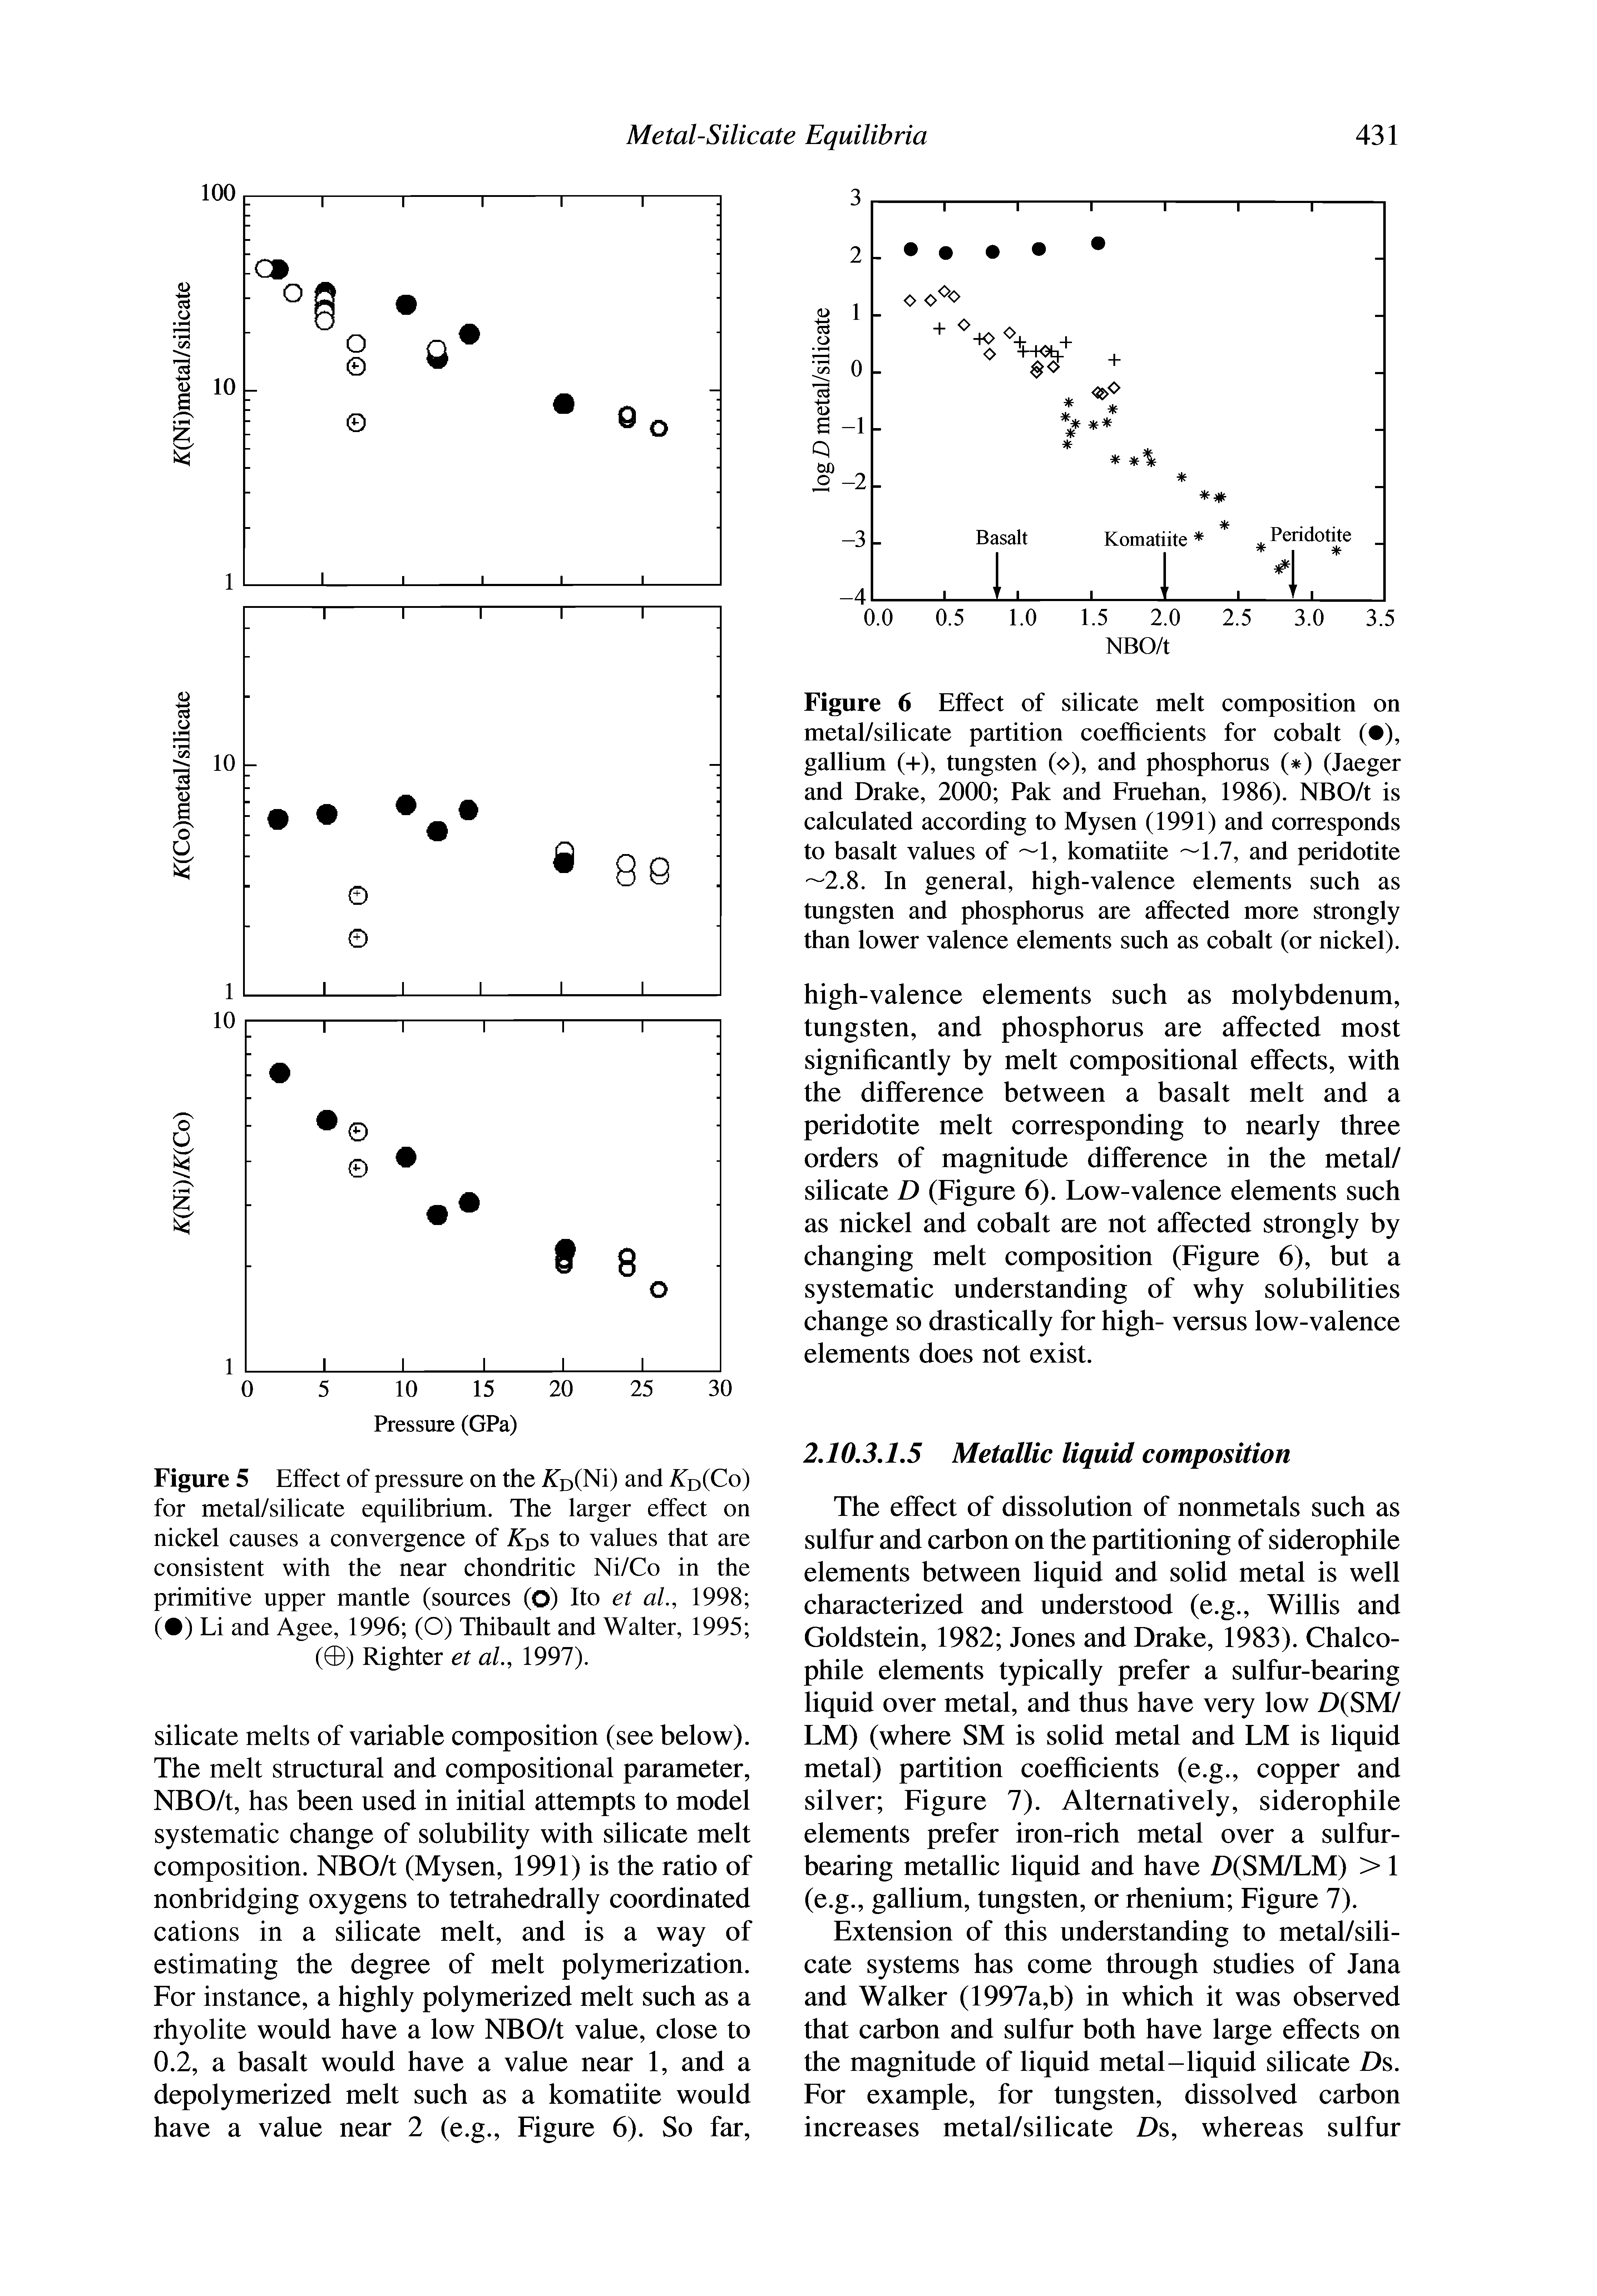 Figure 6 Effect of silicate melt composition on metal/silicate partition coefficients for cobalt ( ), gallium (+), tungsten (o), and phosphorus ( ) (Jaeger and Drake, 2000 Pak and Fruehan, 1986). NBO/t is calculated according to Mysen (1991) and corresponds to basalt values of 1, komatiite —1.7, and peridotite —2.8. In general, high-valence elements such as tungsten and phosphorus are affected more strongly than lower valence elements such as cobalt (or nickel).